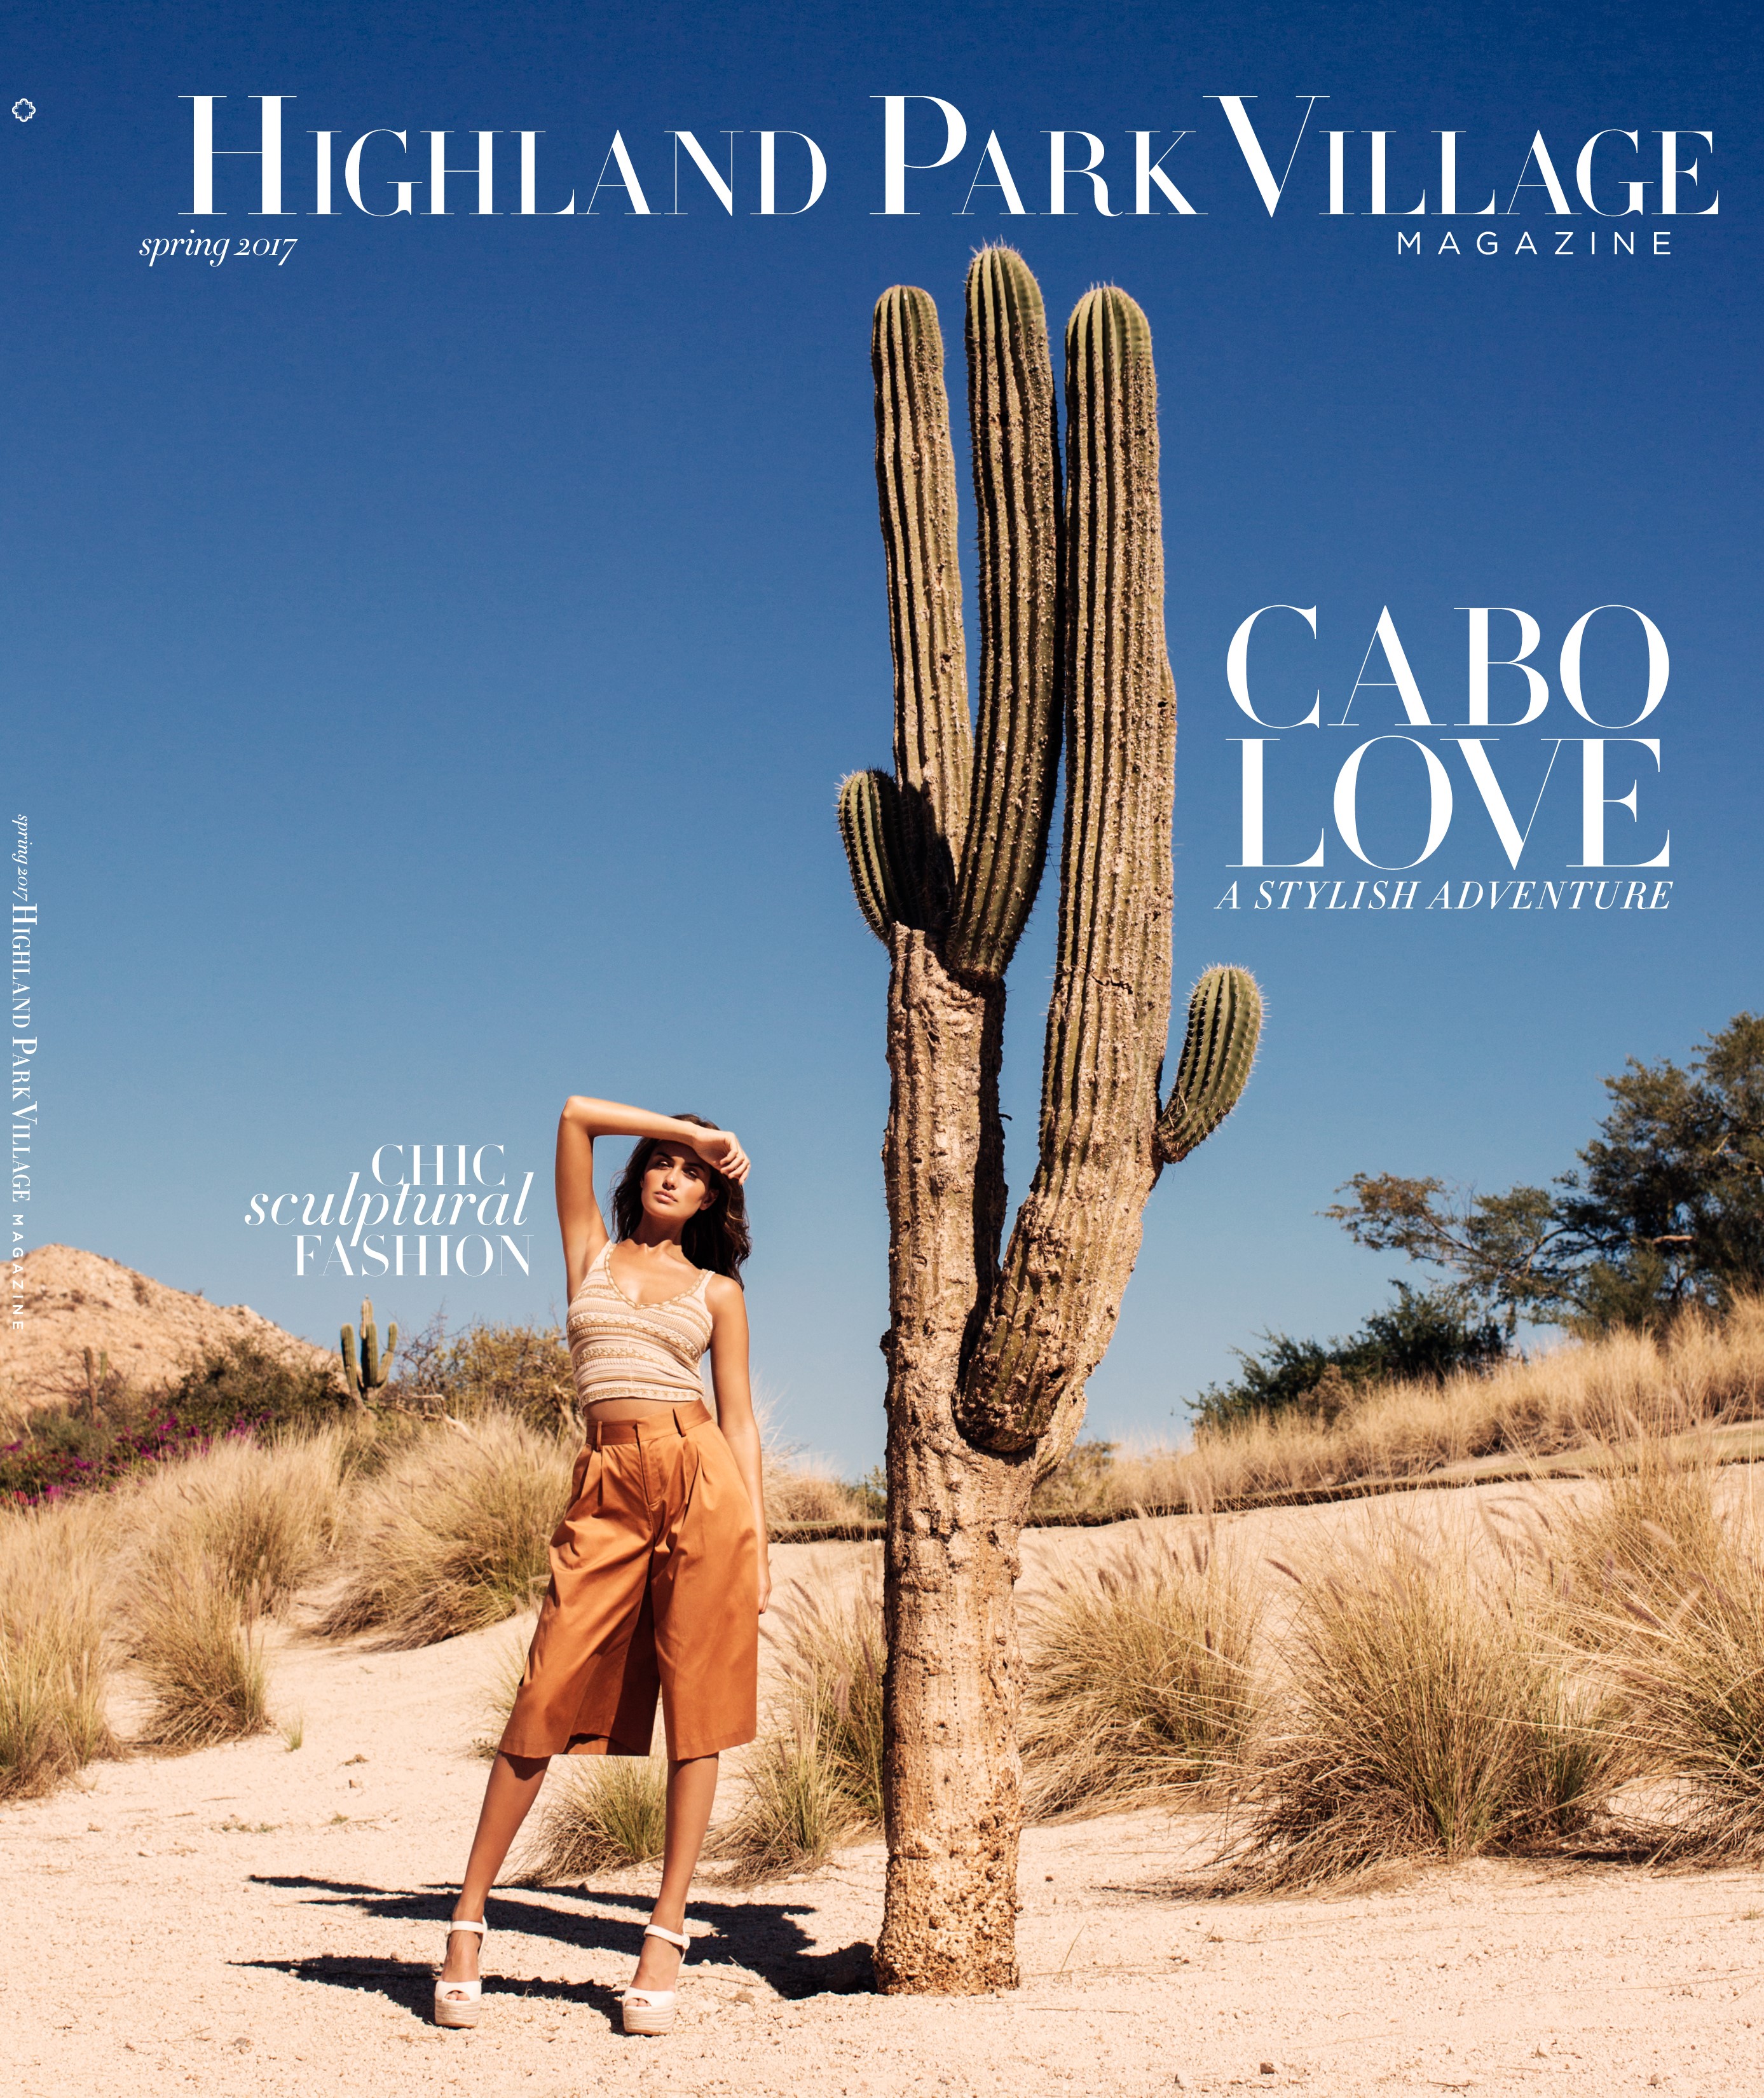 The cover of the Spring 17 Highland Park Village Magazine.